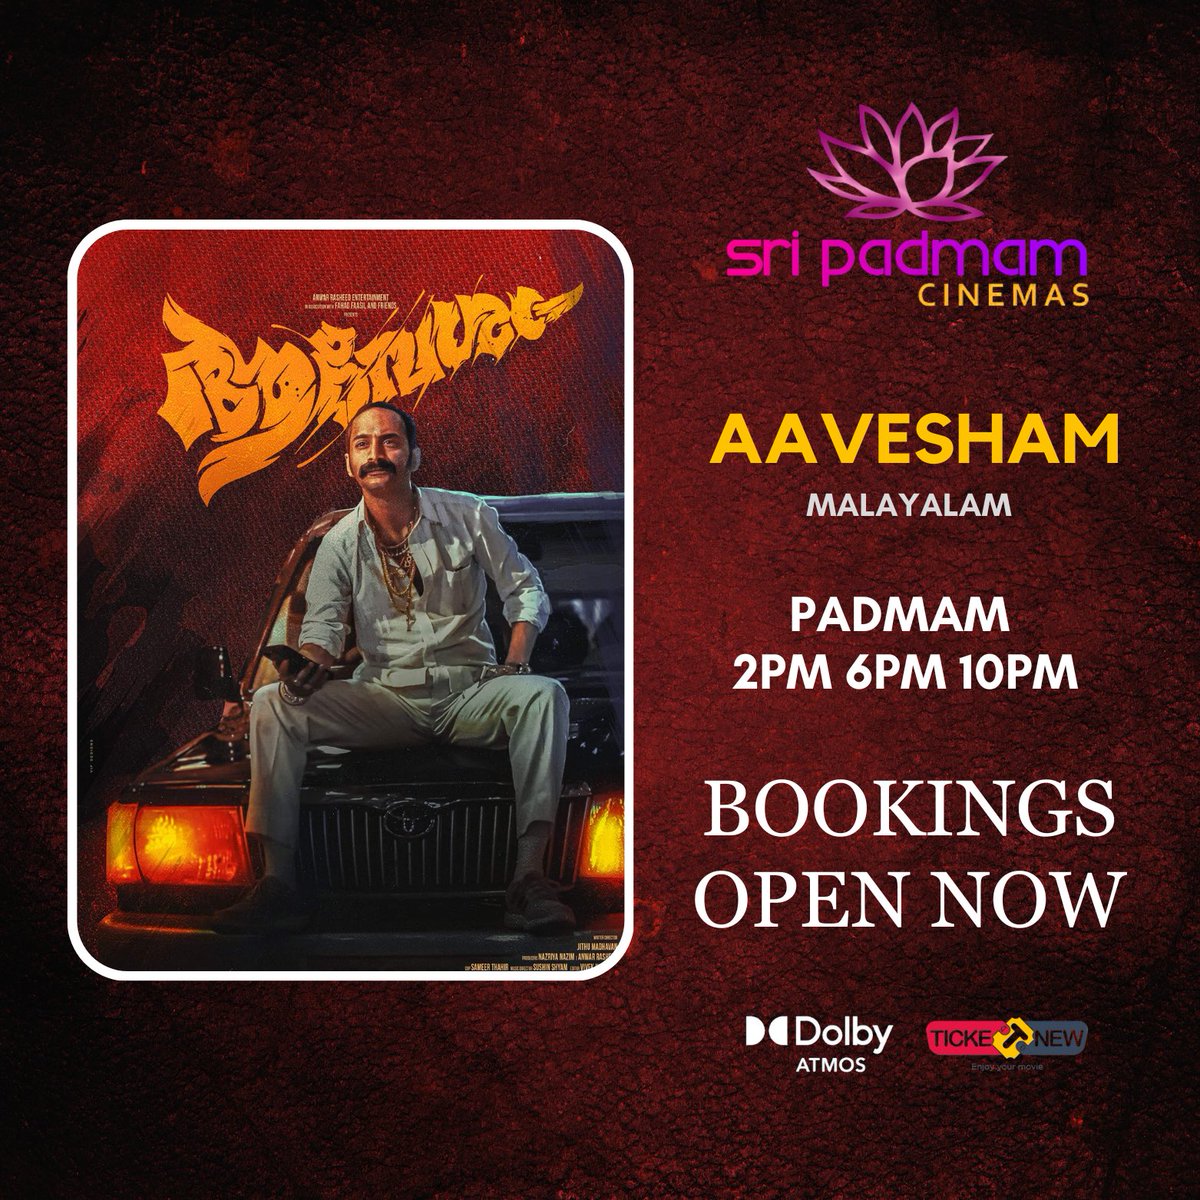 Another Malayalam movie strikes again at @PssMultiplexOff 

#Aavesham adding more show at Tenkasi

Book your tickets now on Ticketnew 

#PssMultiplex #Tenkasi #SriPadmamCinemas #Aavesham #MalayalamMovie